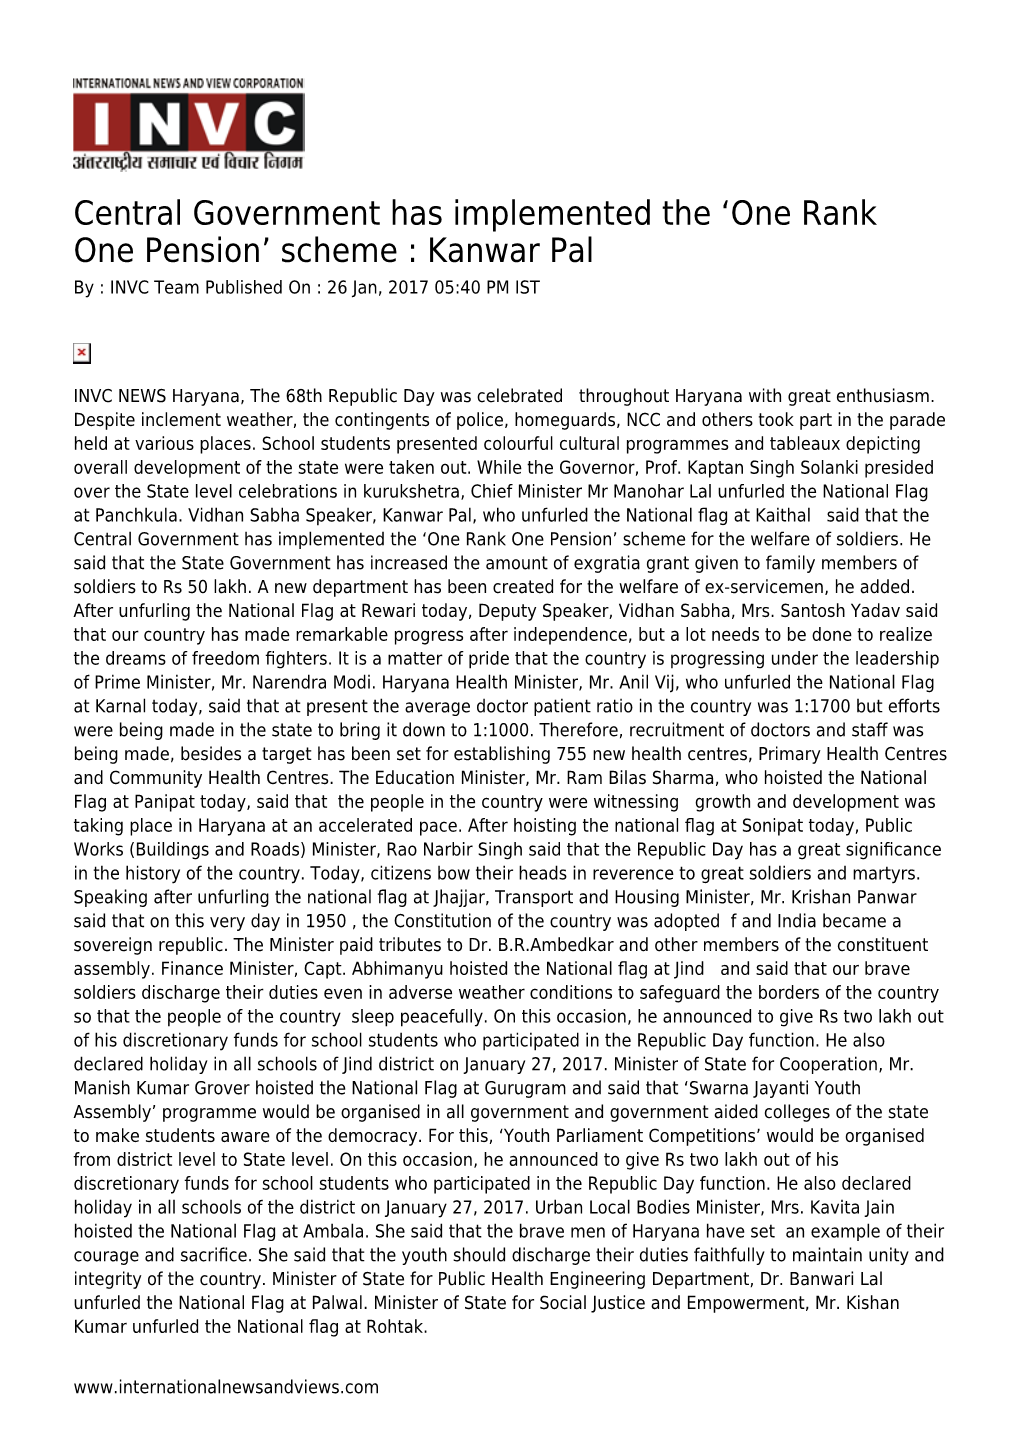 Central Government Has Implemented the 'One Rank One Pension